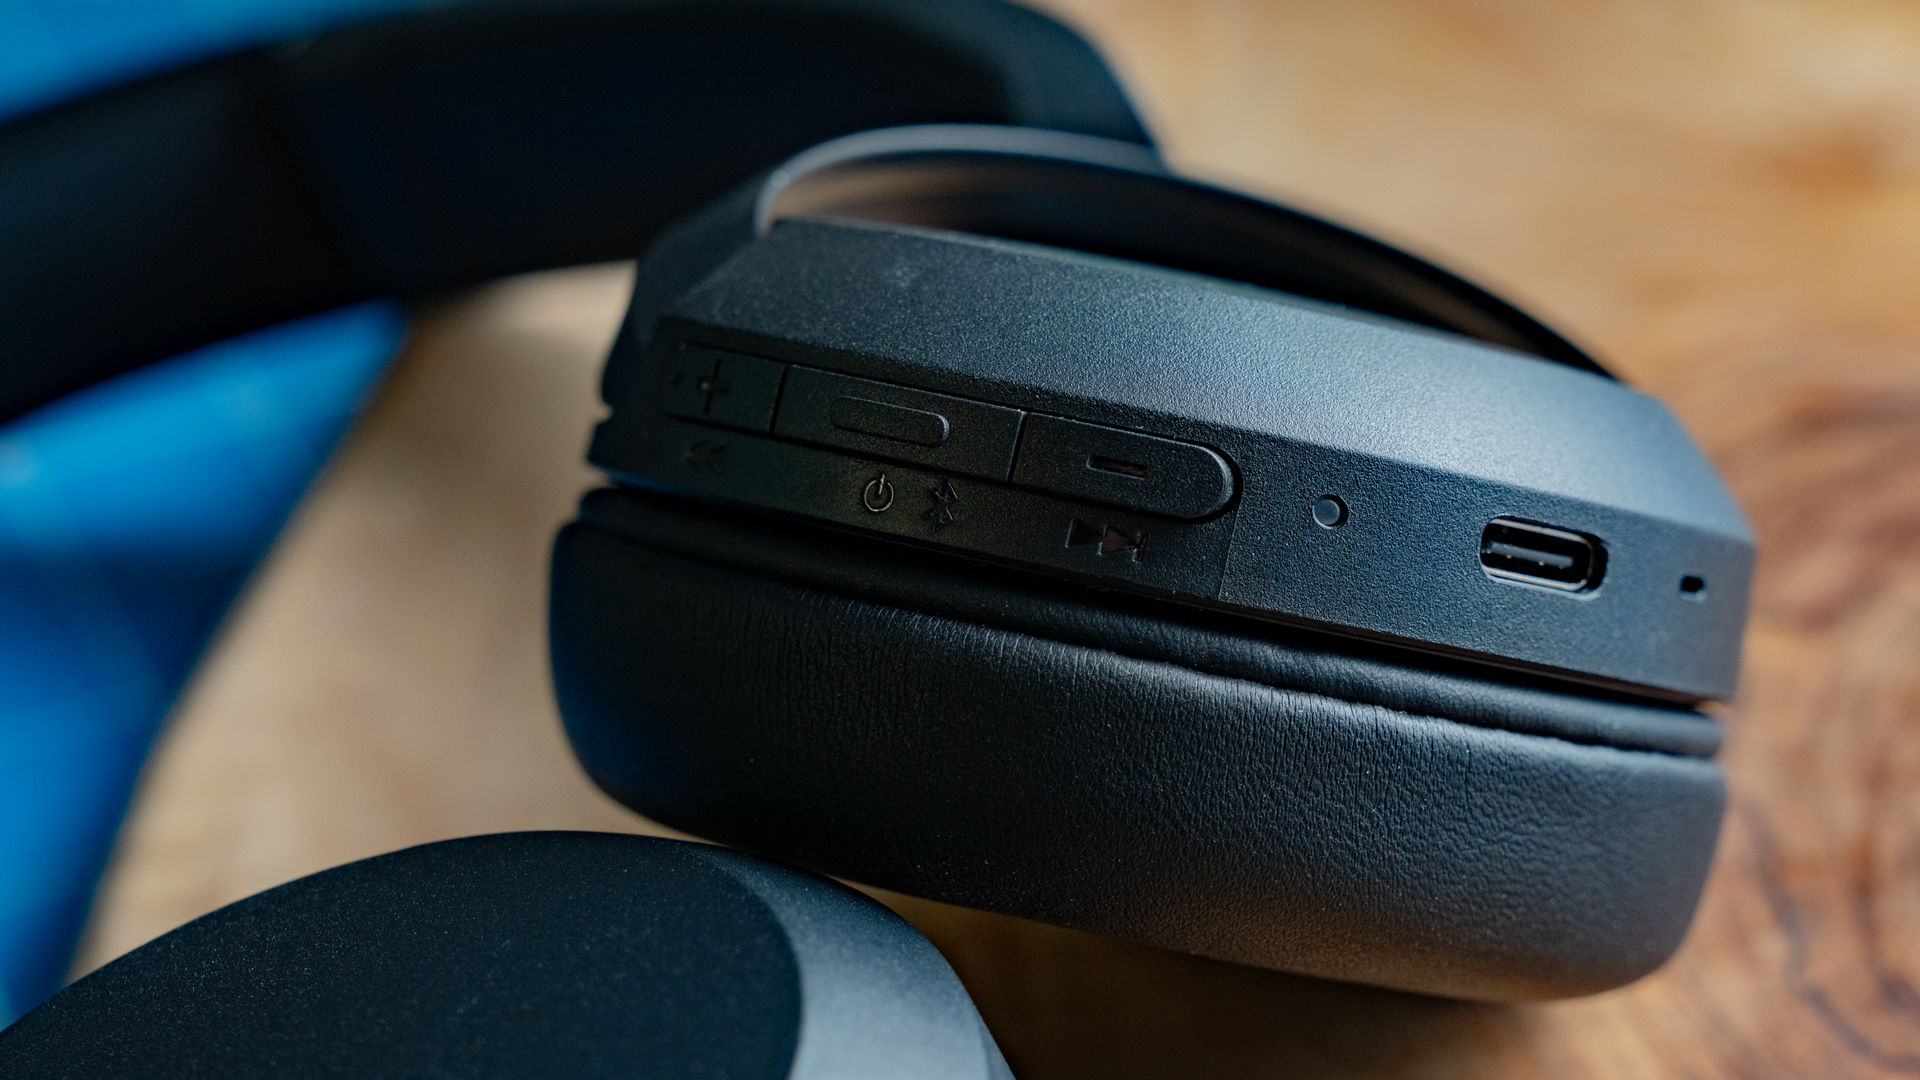 The controls of the Sony WH-CH520 are located on the right ear cup.